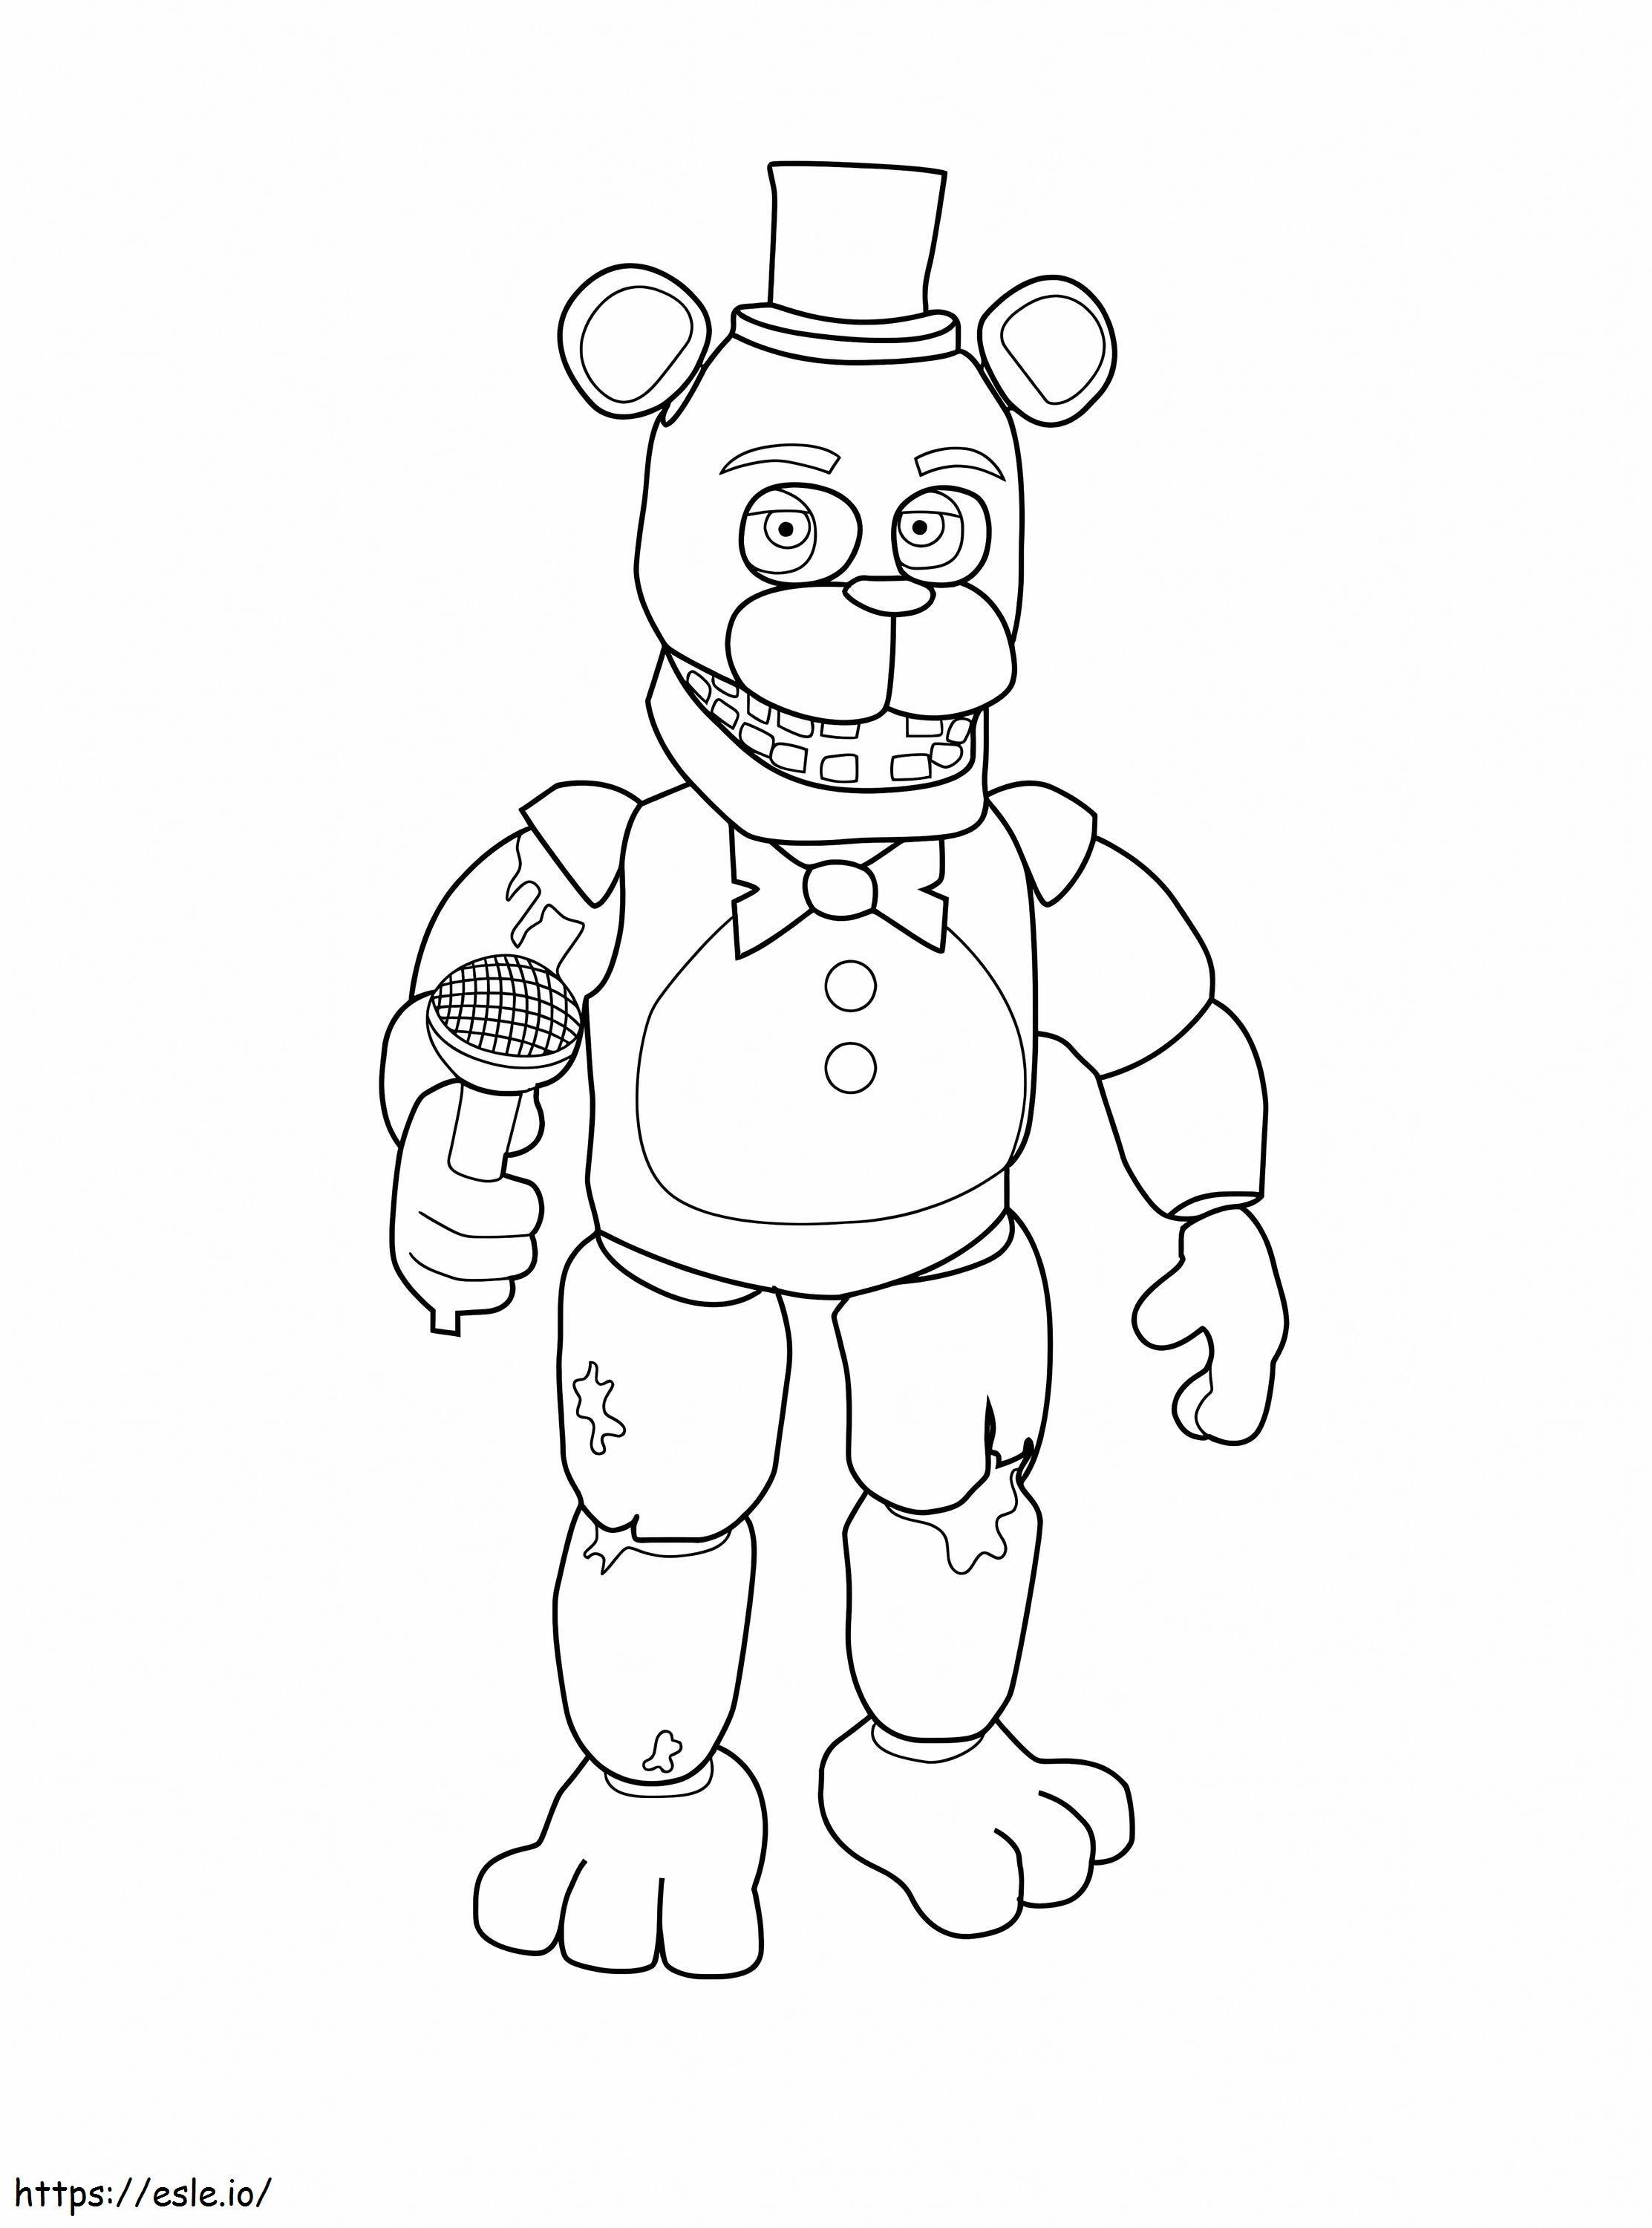 Freddy Withered Holding Up A Microphone coloring page